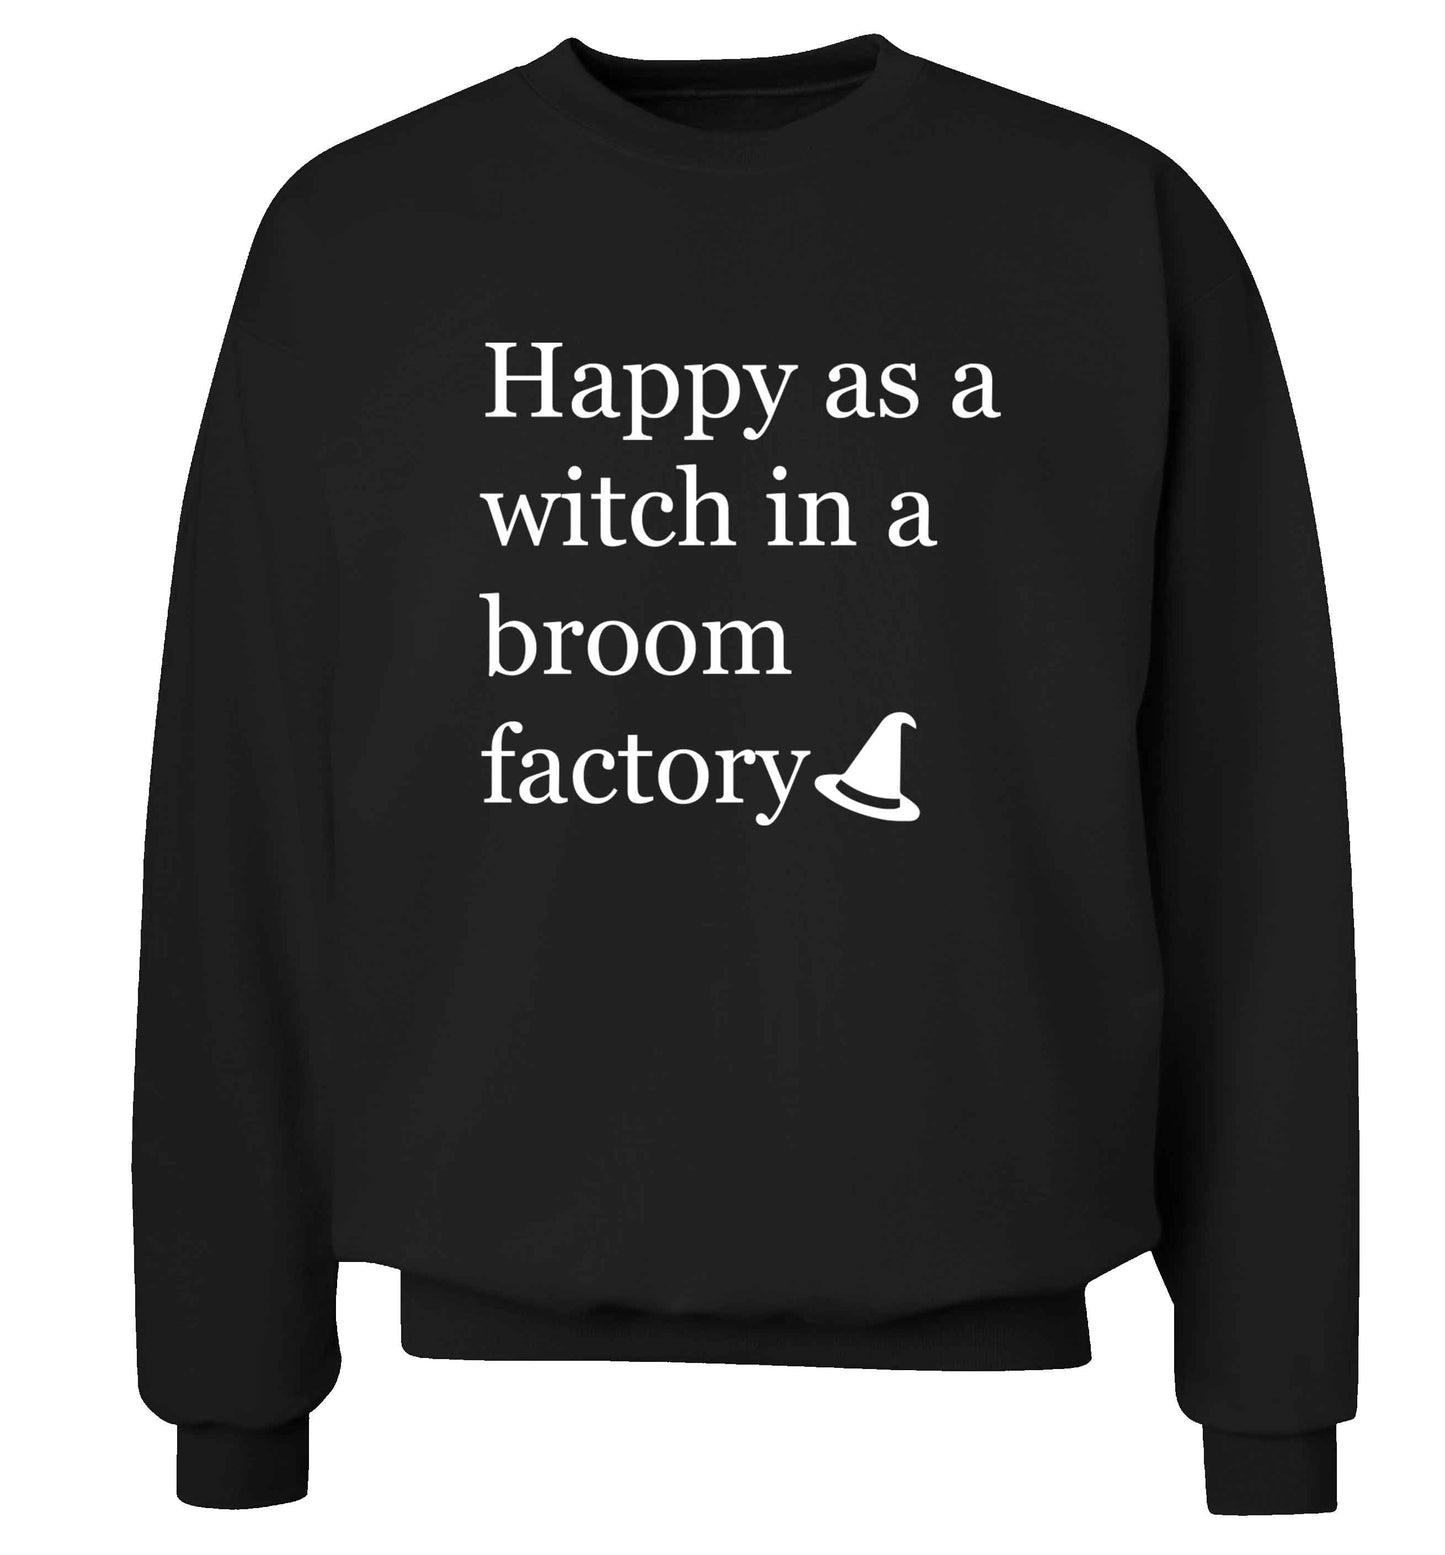 Happy as a witch in a broom factory adult's unisex black sweater 2XL